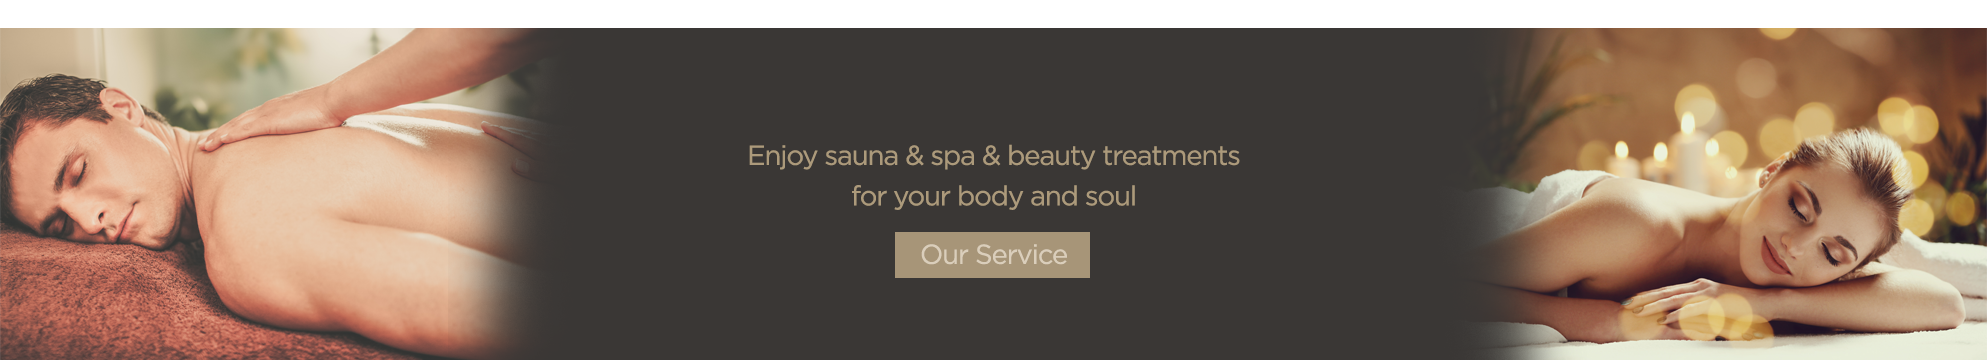 Spa Lynnwood Sauna Seattle, Millcreek Best Woman Spa Seattle Spa | Sauna & Spa Lynnwood, Seattle, Millcreek, Men Spa, Men Sauna, Woman Sauna, Woman Spa, Massage, Hot Tub, Best Spa, Jacuzzi, Infrared Sauna, Steam Room, Hot Sauna, Korean Style Sauna, Man Spa, Family Spa, Q Sauna & Spa Offers Services For Both Men And Women Including Massages, Facials And Our Spa Packages.